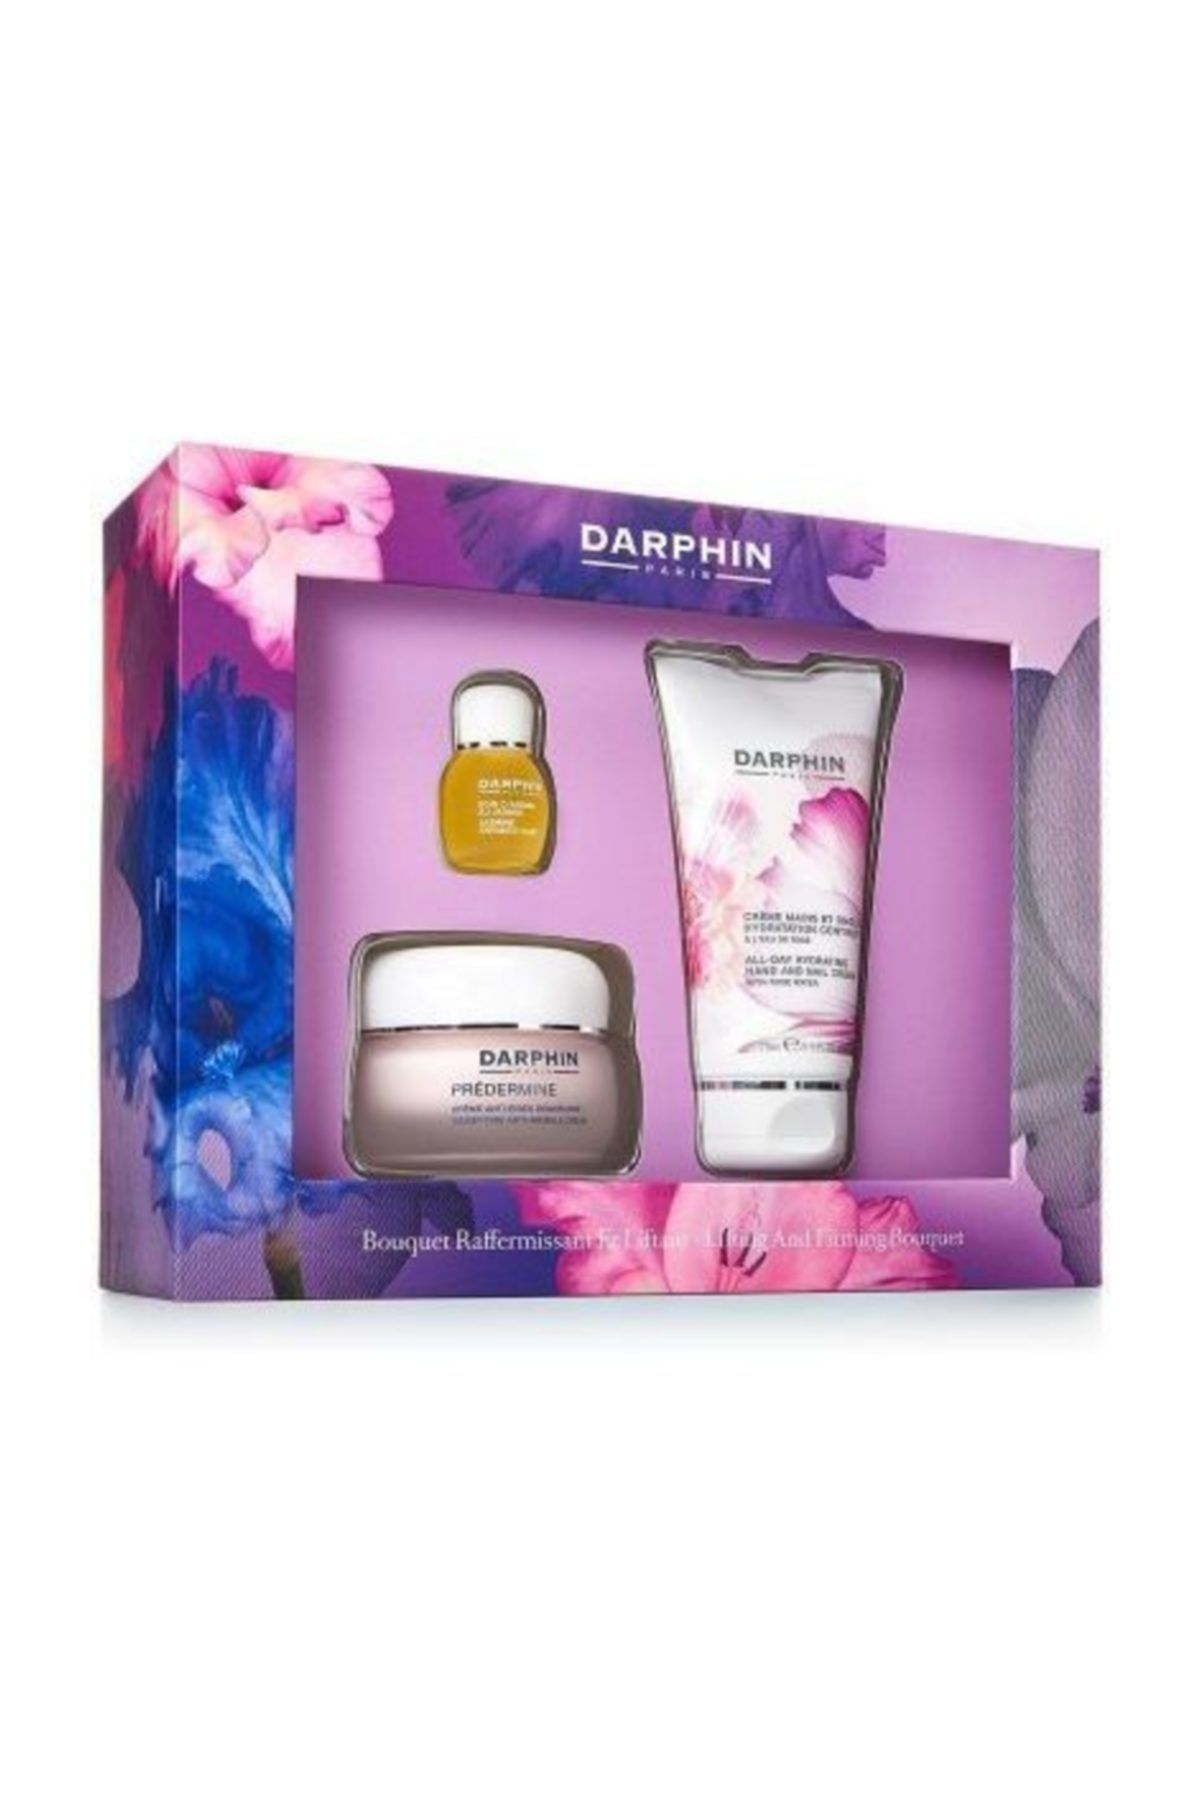 Darphin Predermine Lifting And Firming Bouqet Set